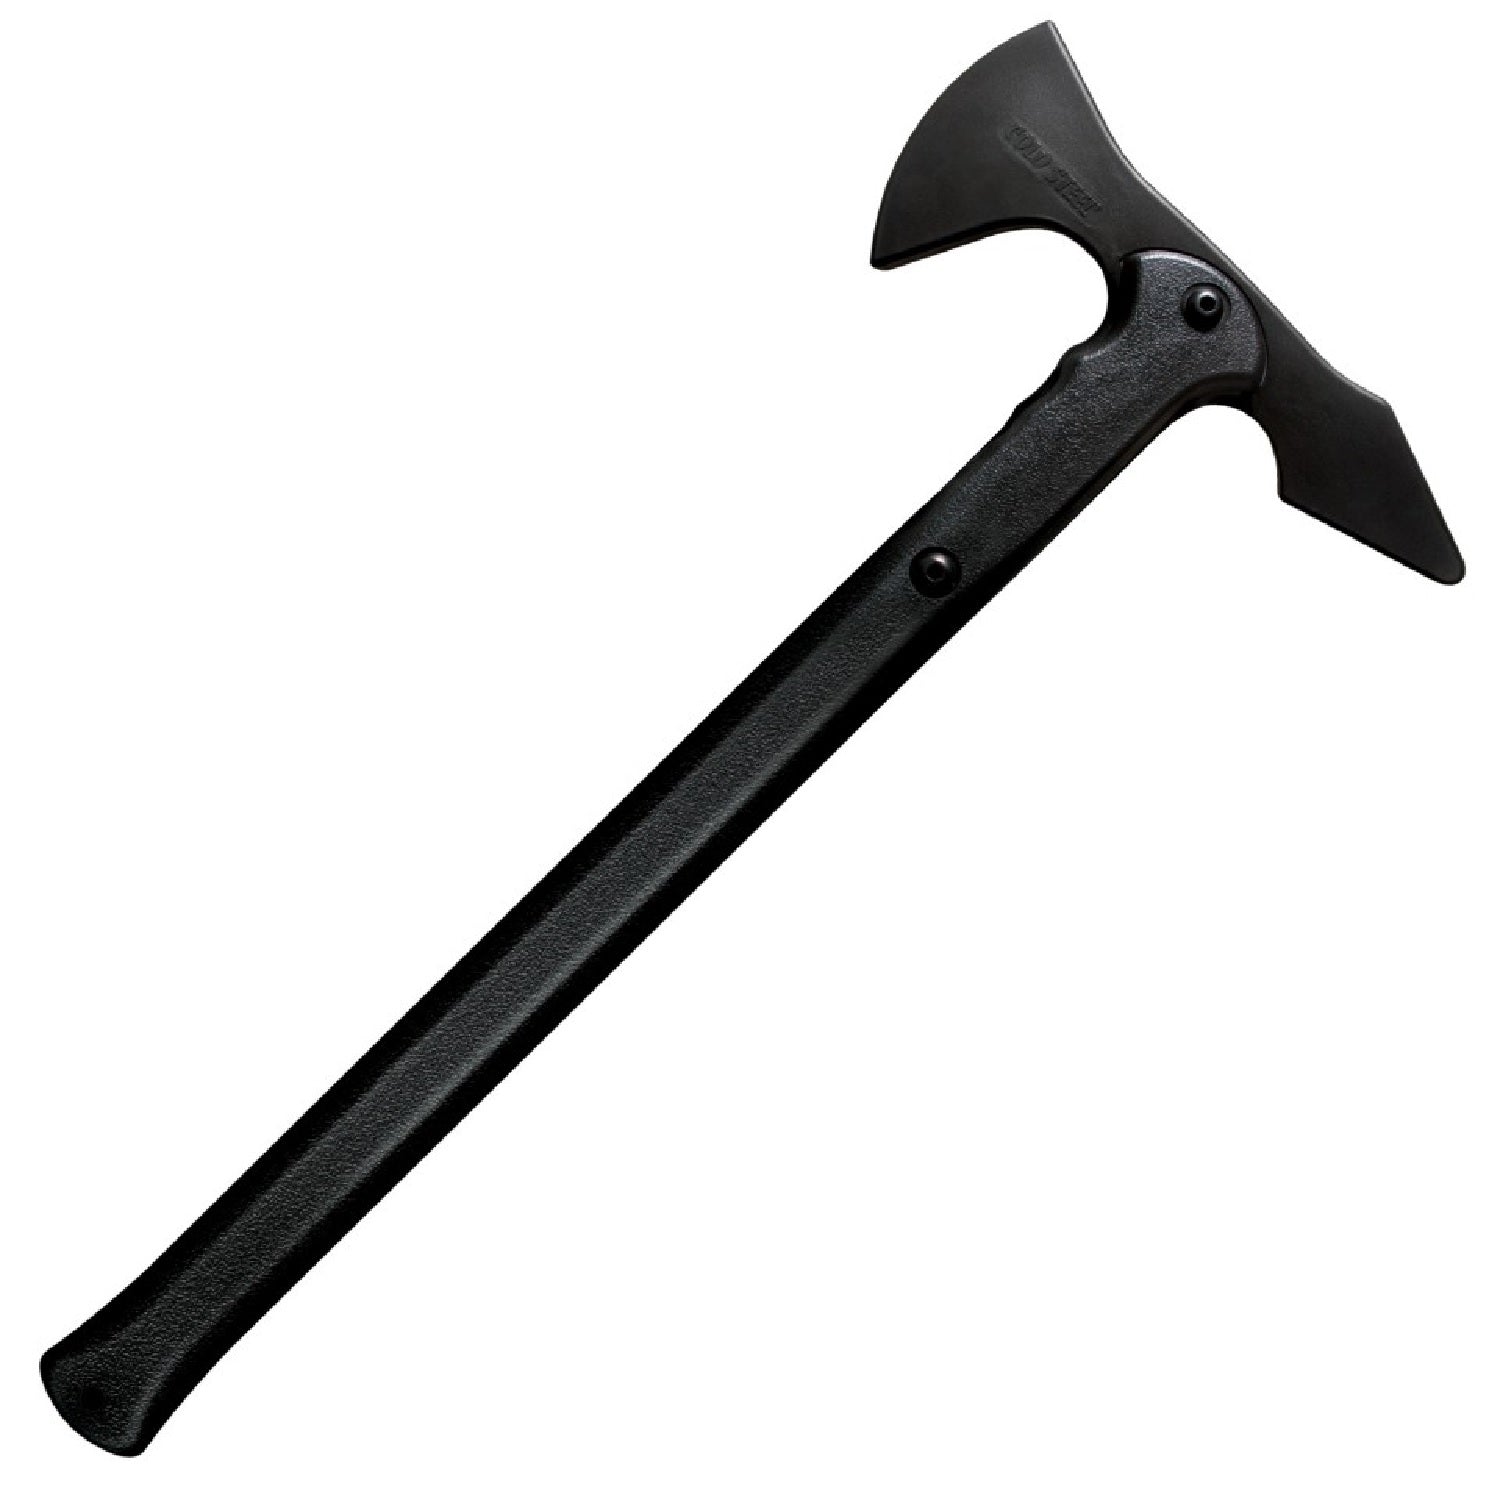 Cold Steel Trench Hawk Axe Trainer 19.75 in Overall Length